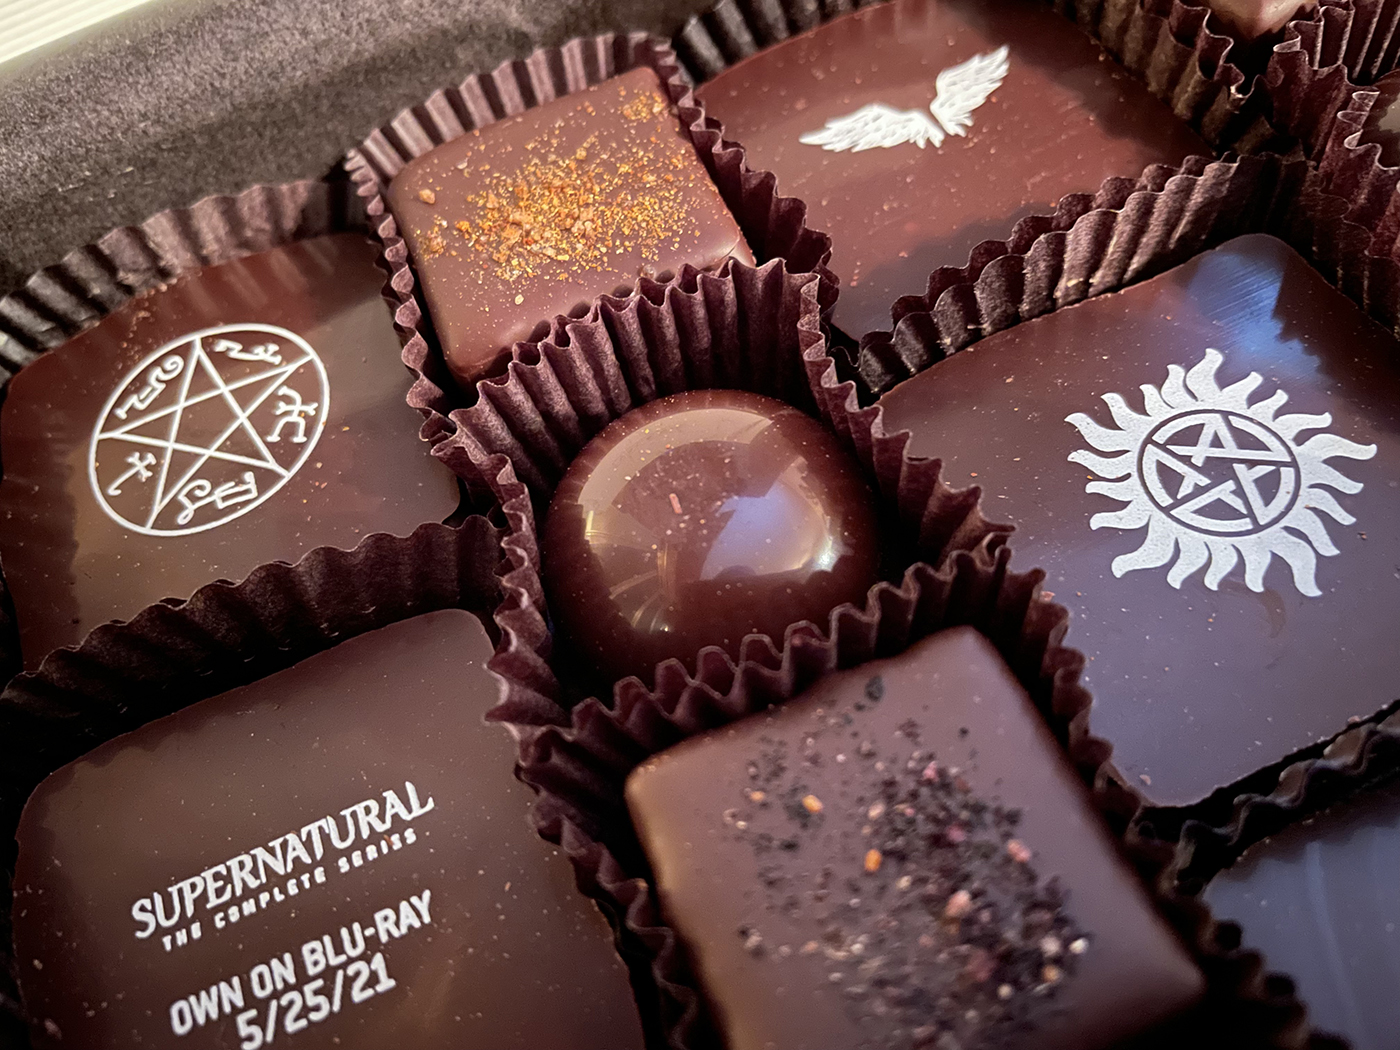 'Supernatural' Themed Chocolates - Handcrafted by Valerie Confections